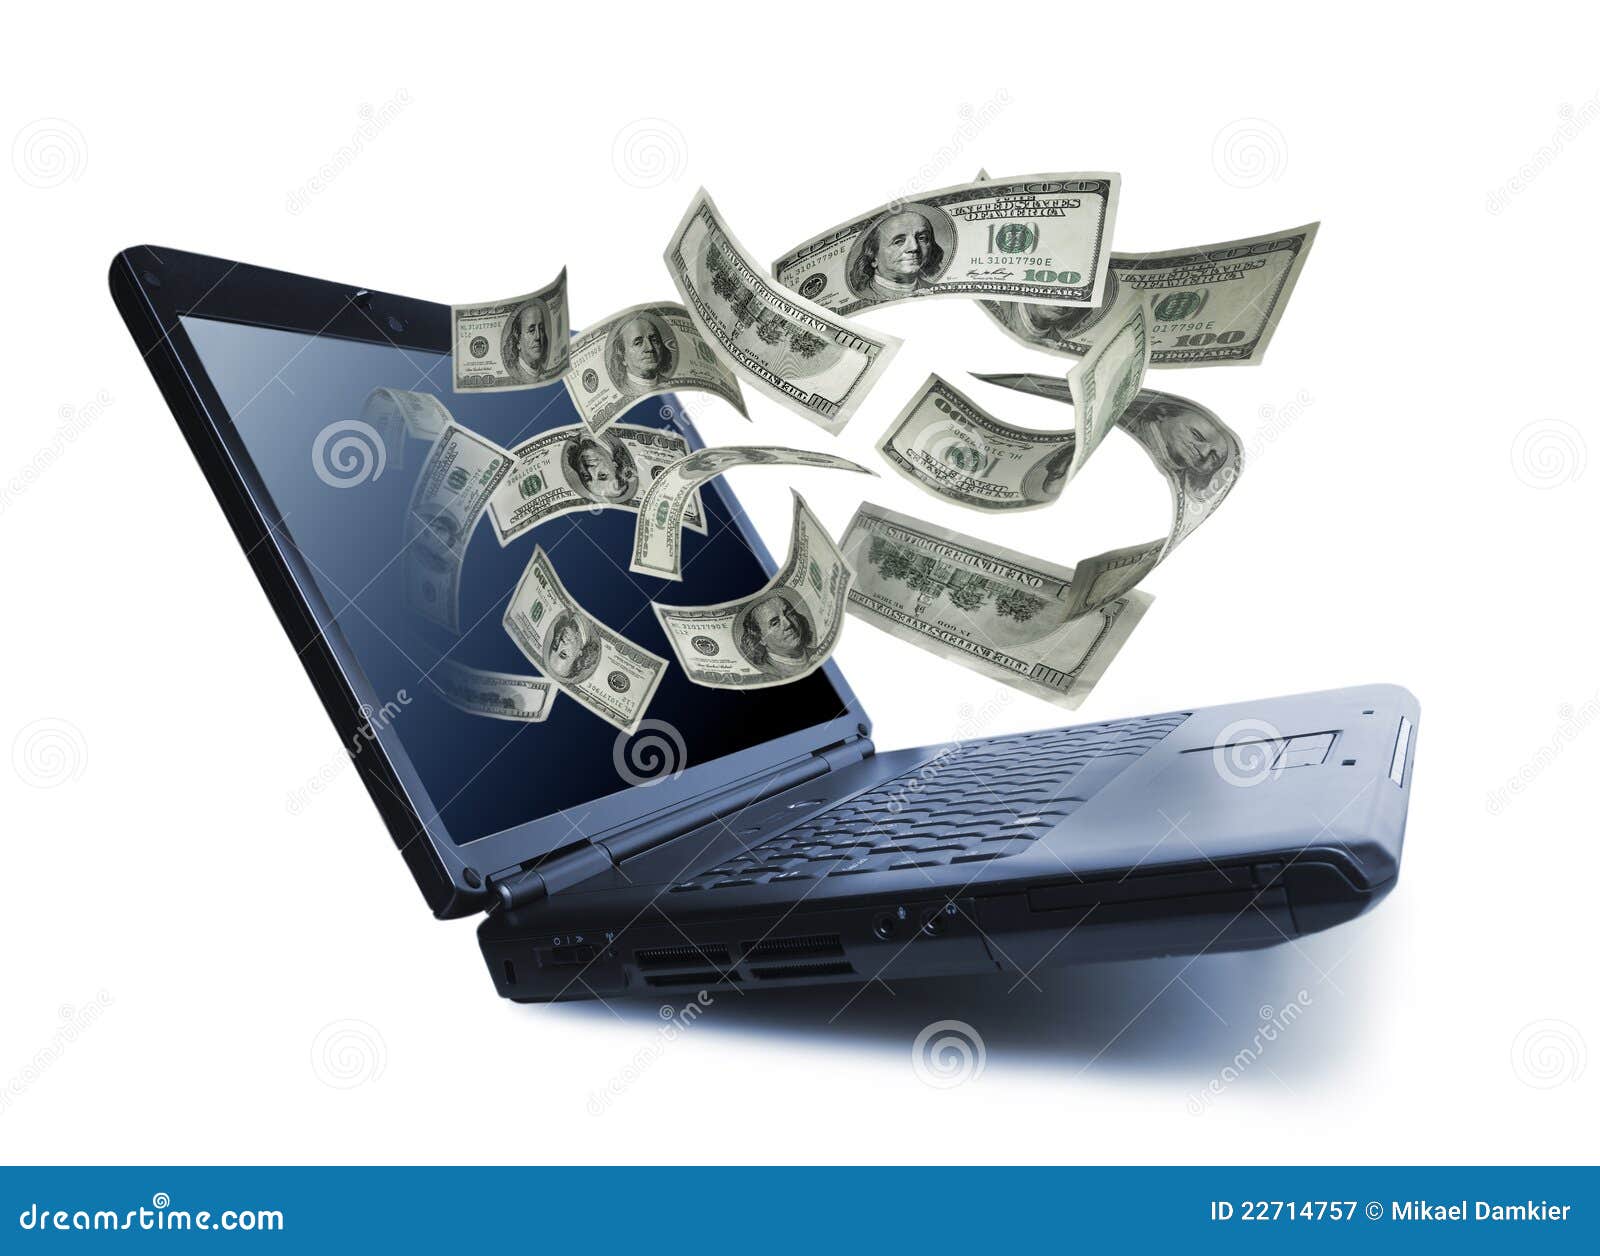 money pouring out from a notebook computer